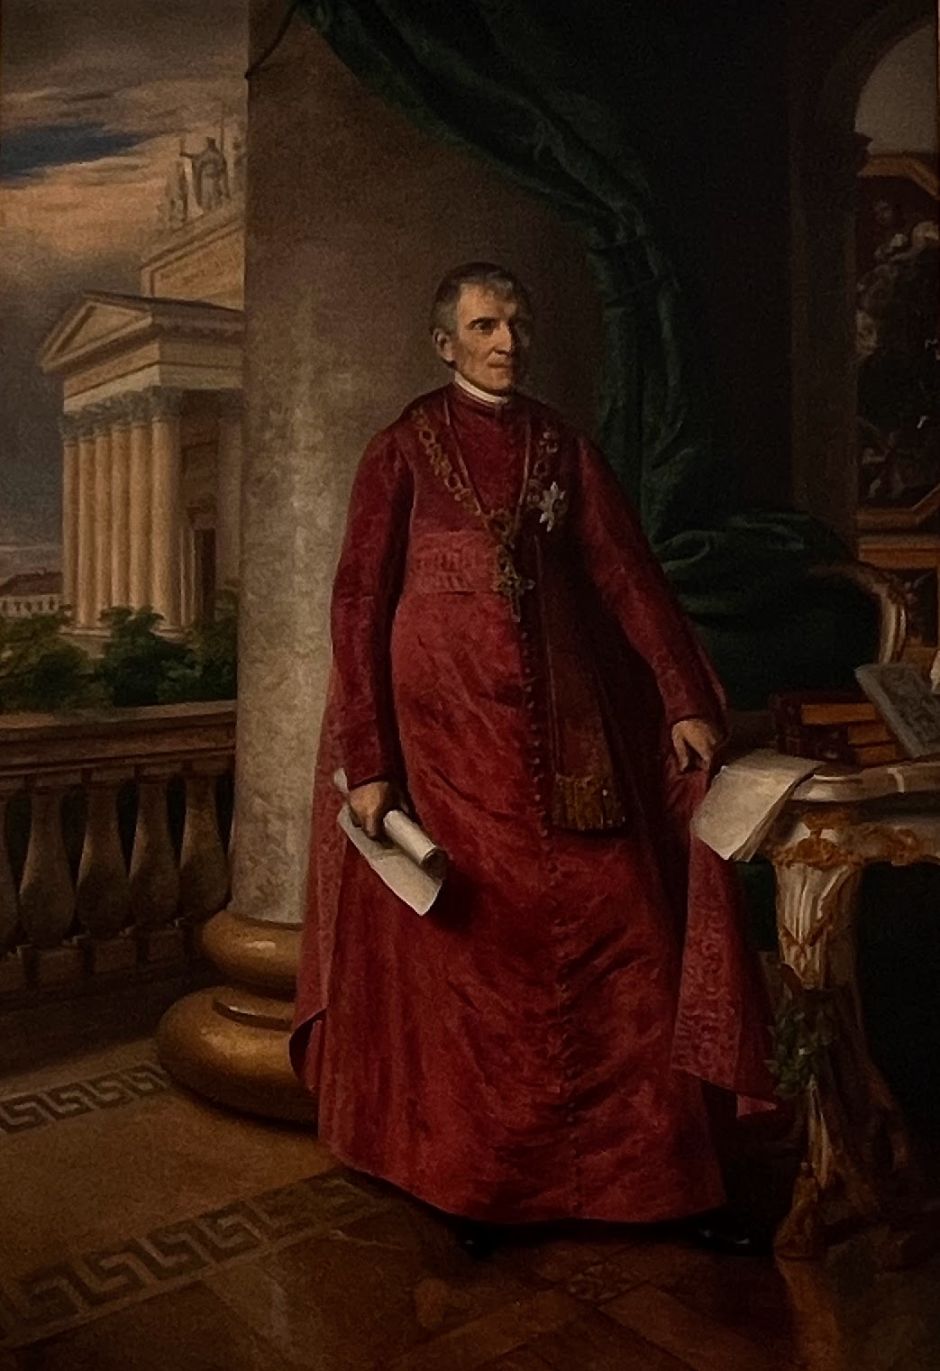 It took some time for the citizens of Eger to warm up to Pyrker’s quietly assertive manner, but in 1842, the city commissioned the famous painter, Miklós Barabás, for a life-sized portrait of the Archbishop. Still brimming with intelligence, Pyrker is shown surrounded by his main achievements: the basilica, the painting gallery, and his literary works. Photo: Tas Tóbiás